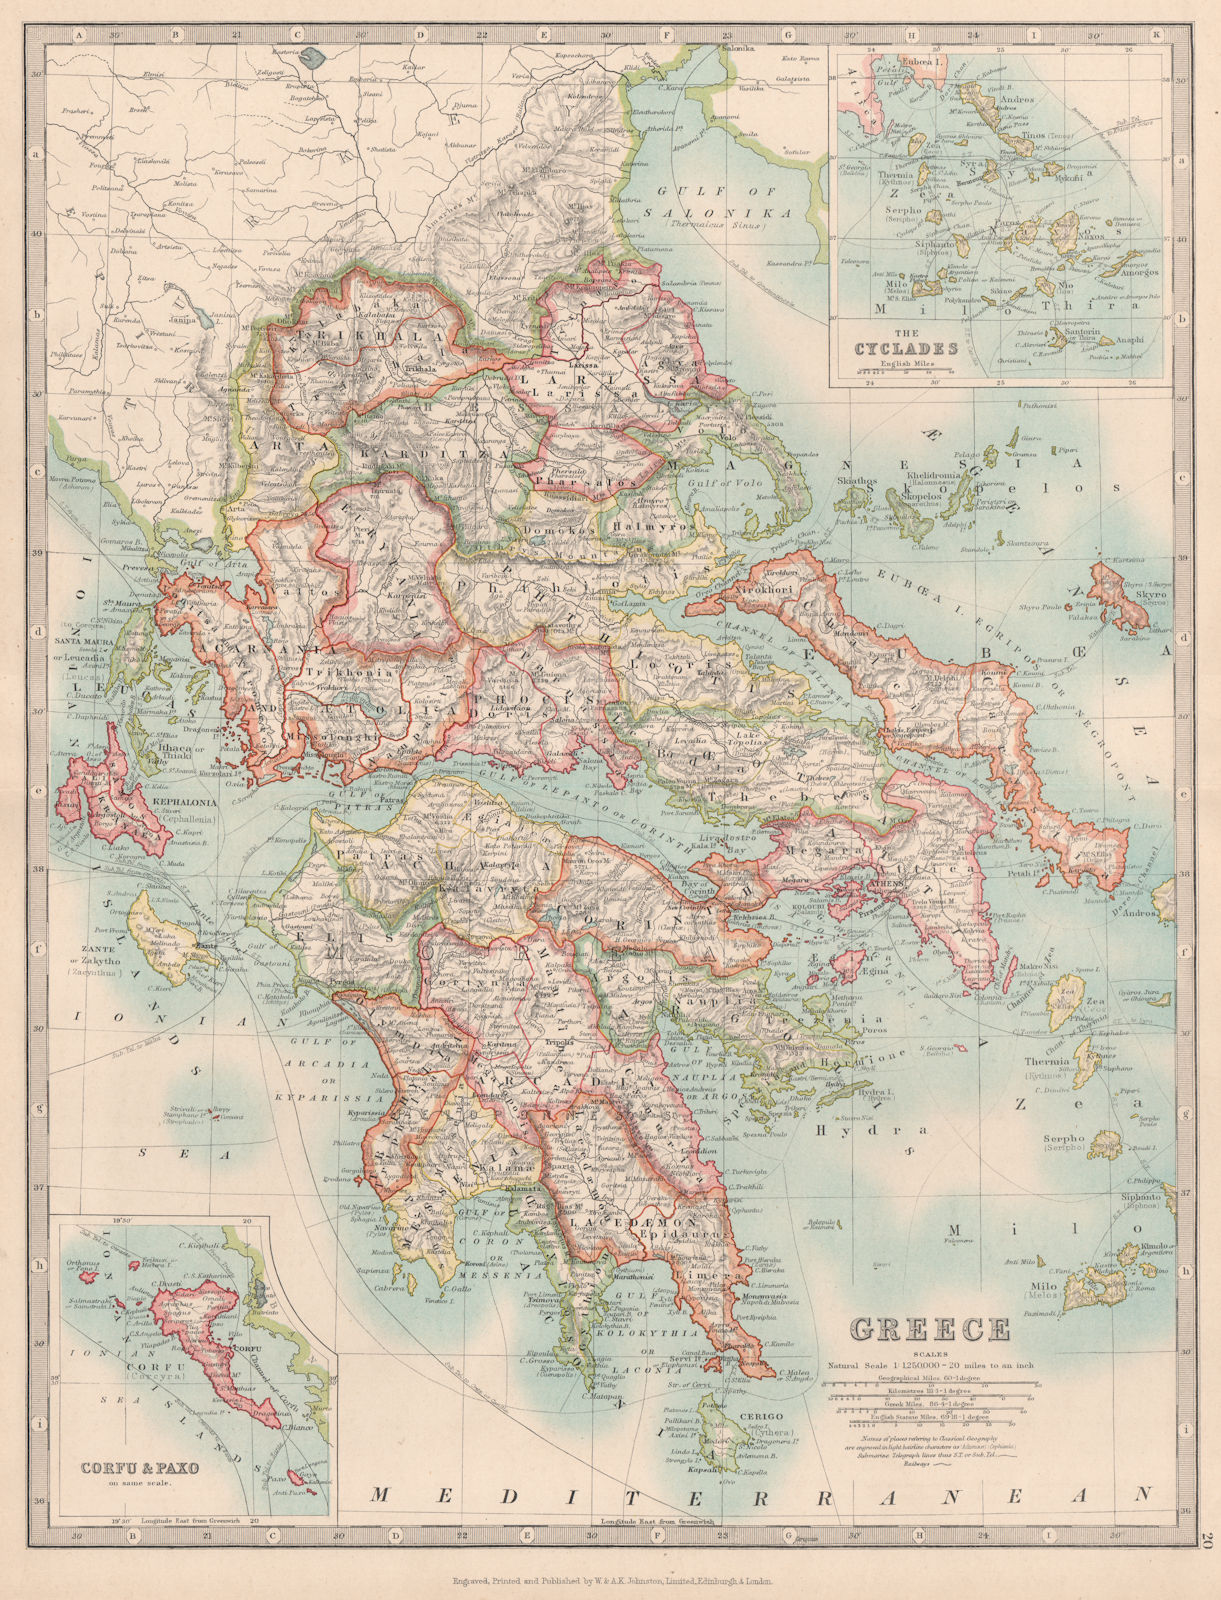 Associate Product GREECE. Inset Corfu Paxo Cyclades. Railways. JOHNSTON 1912 old antique map